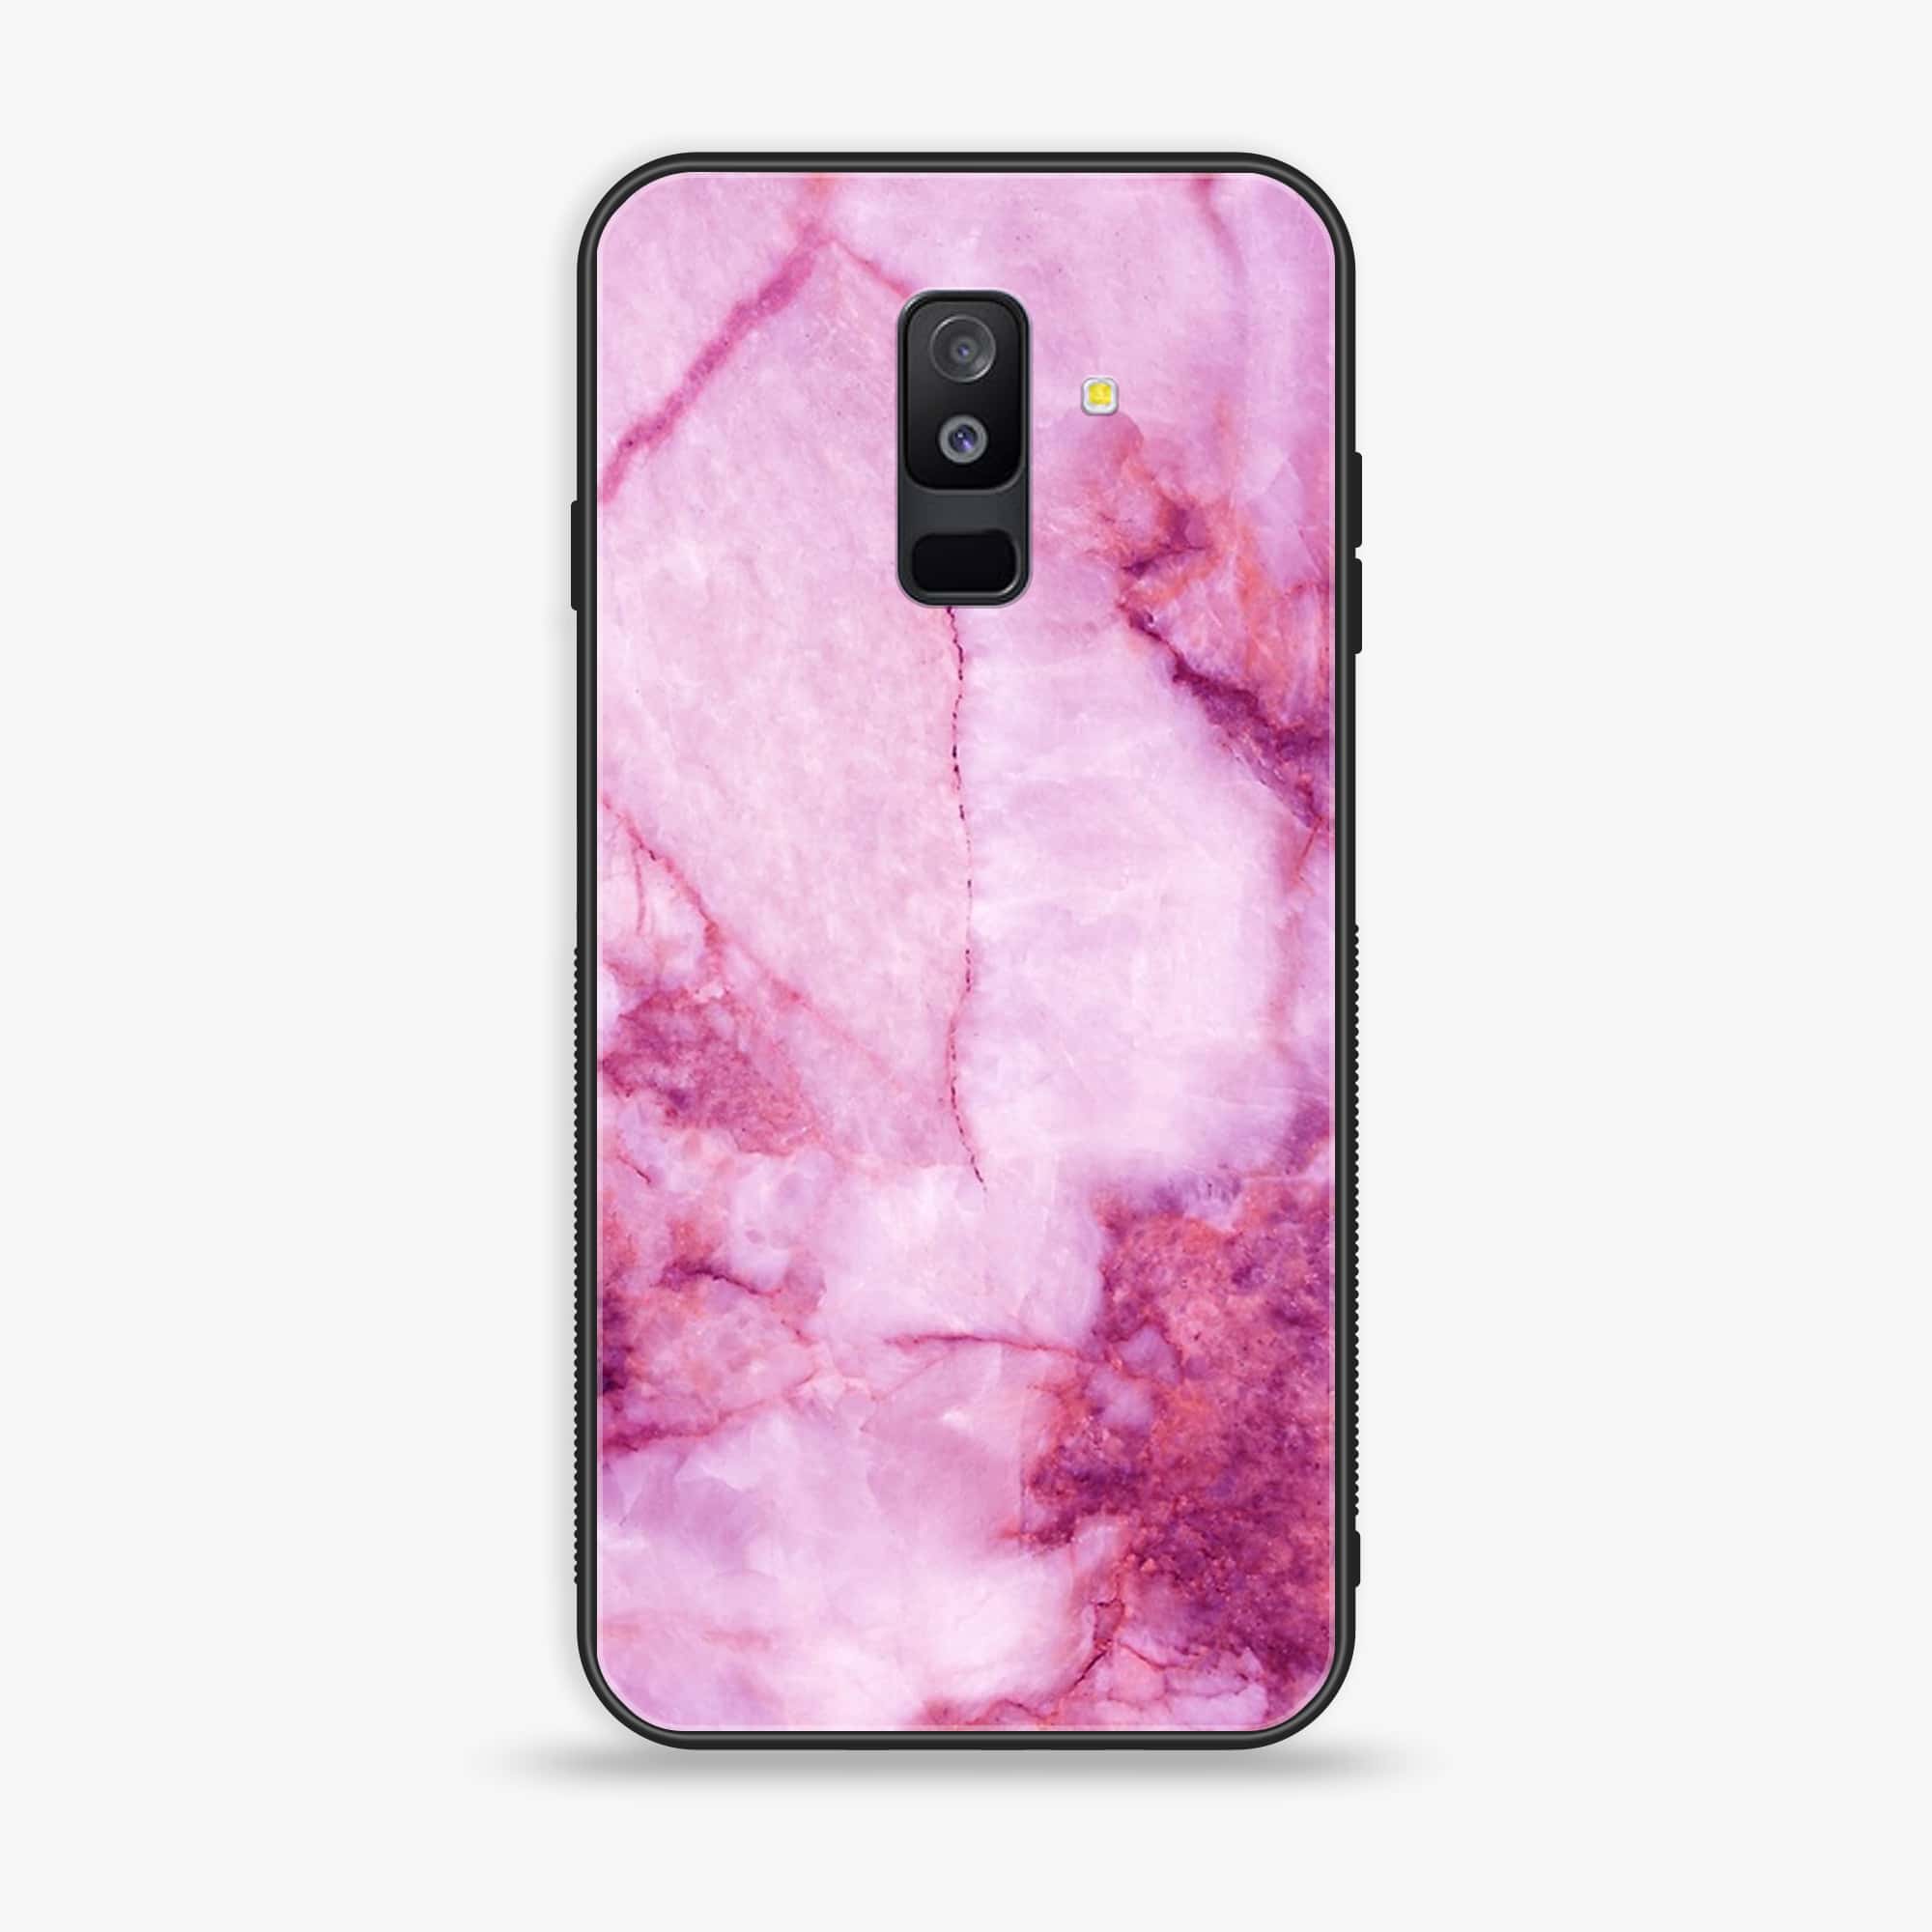 Samsung Galaxy A6 Plus (2018) - Pink Marble Series - Premium Printed Glass soft Bumper shock Proof Case